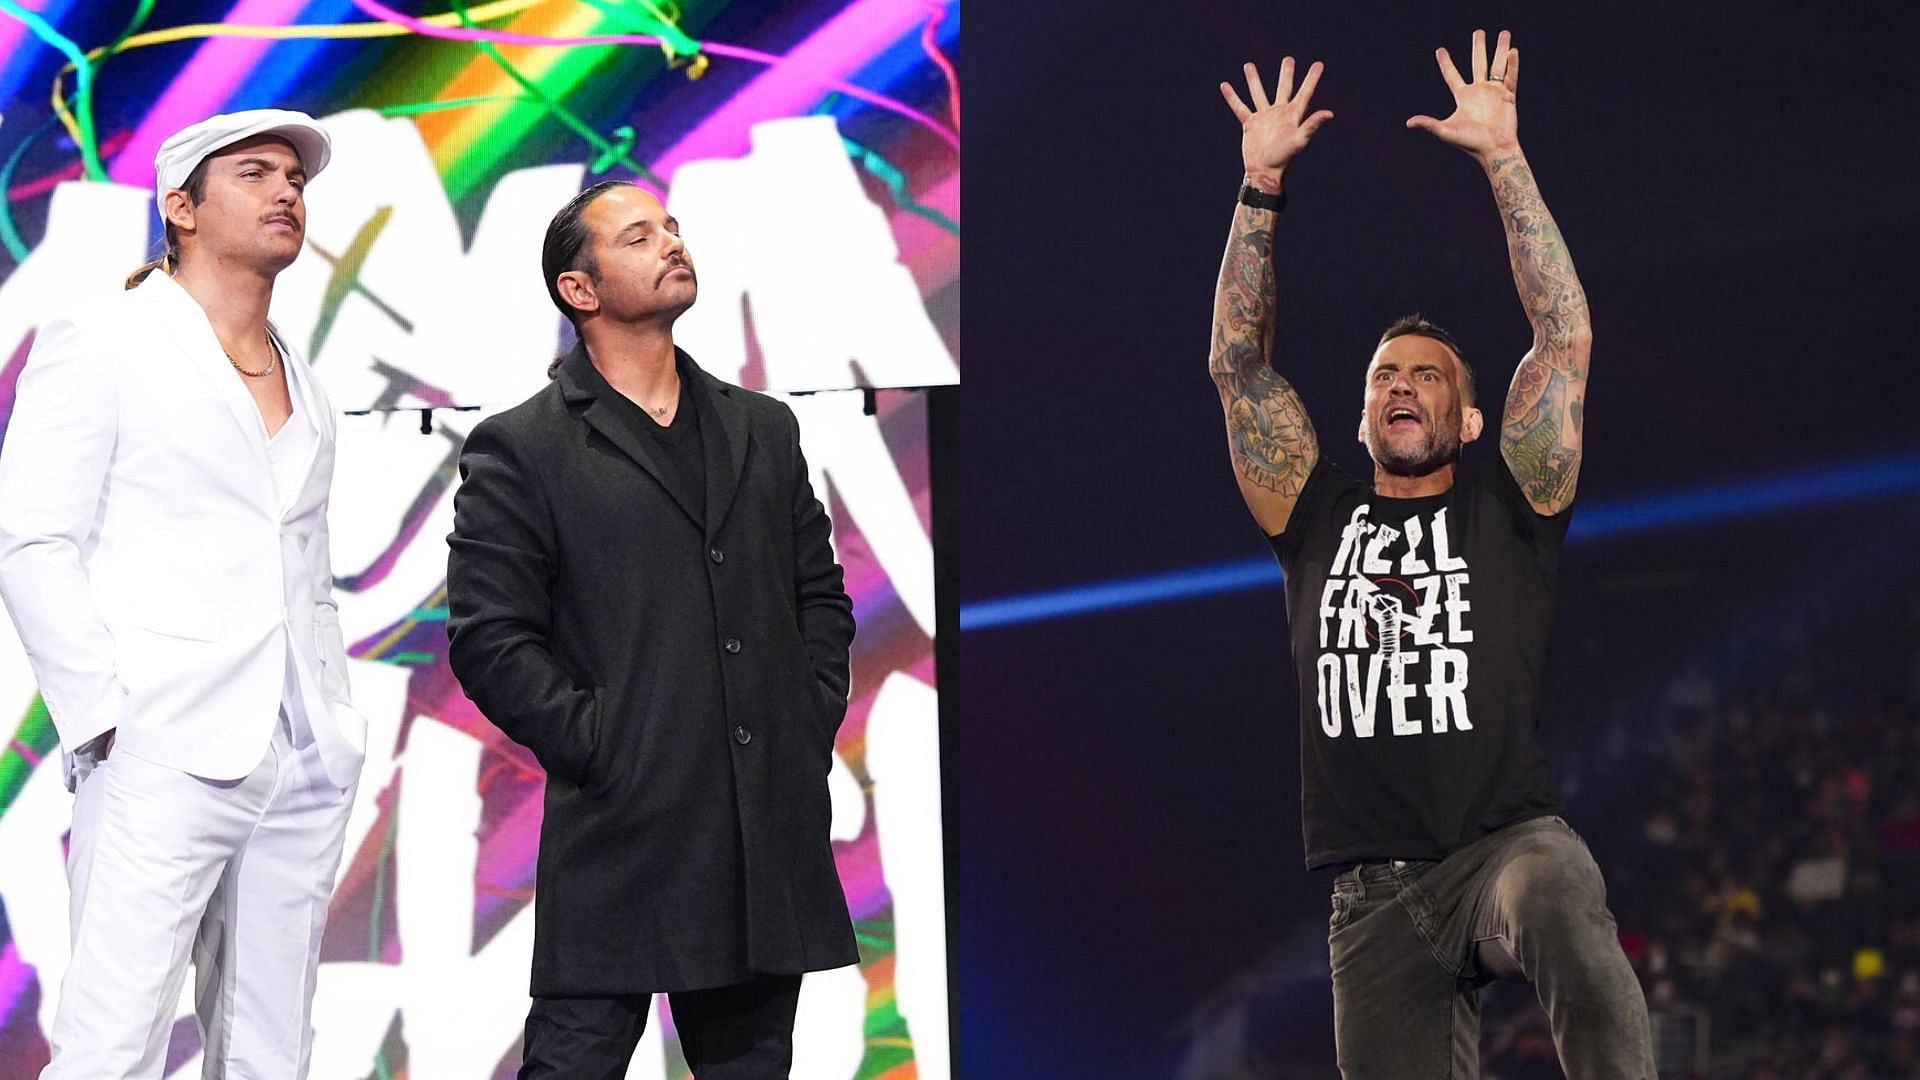 Young Bucks and CM Punk were not in good terms back in AEW [photo courtesy of AEW and WWE